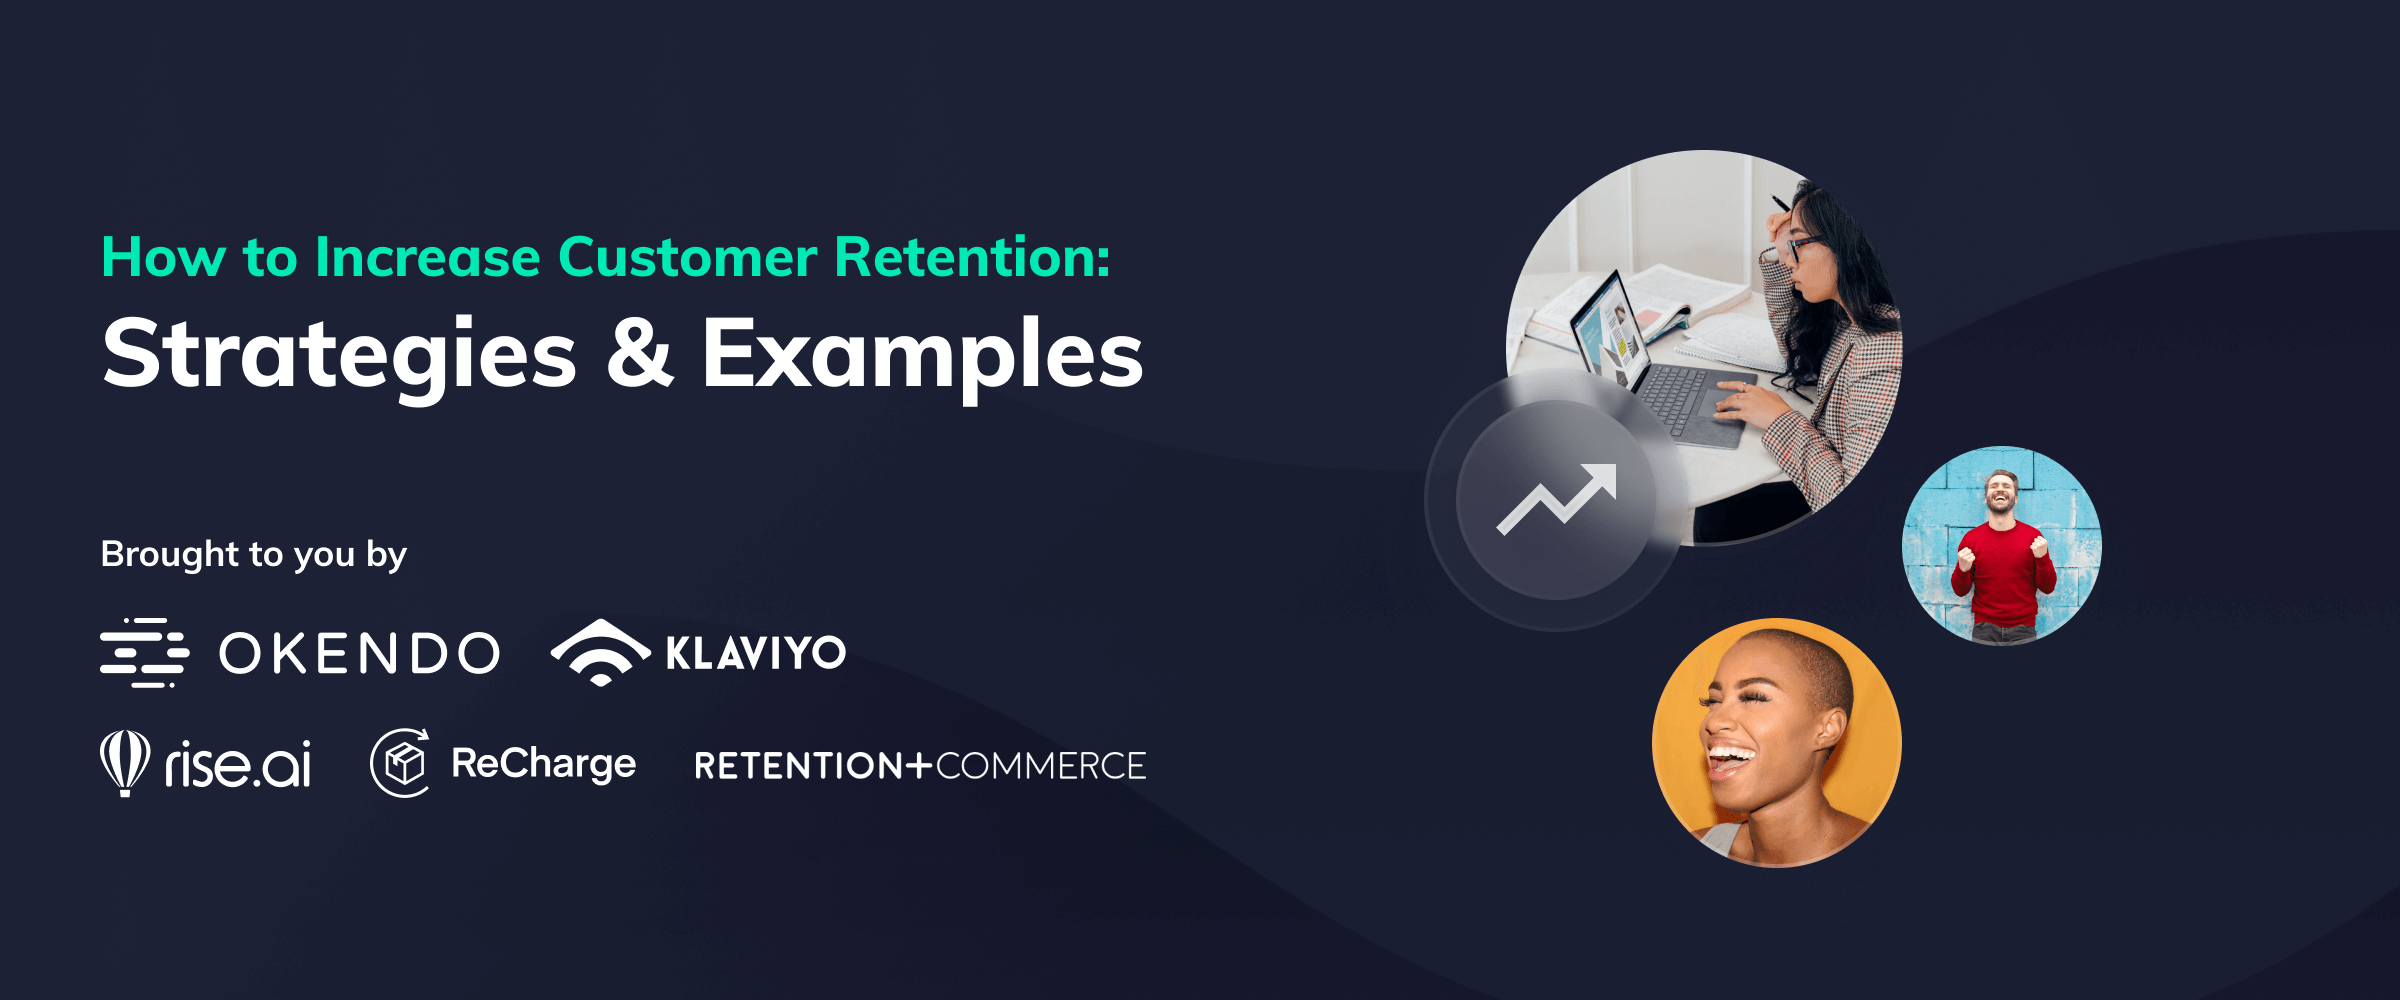 How to Increase Customer Retention: Strategies & Examples